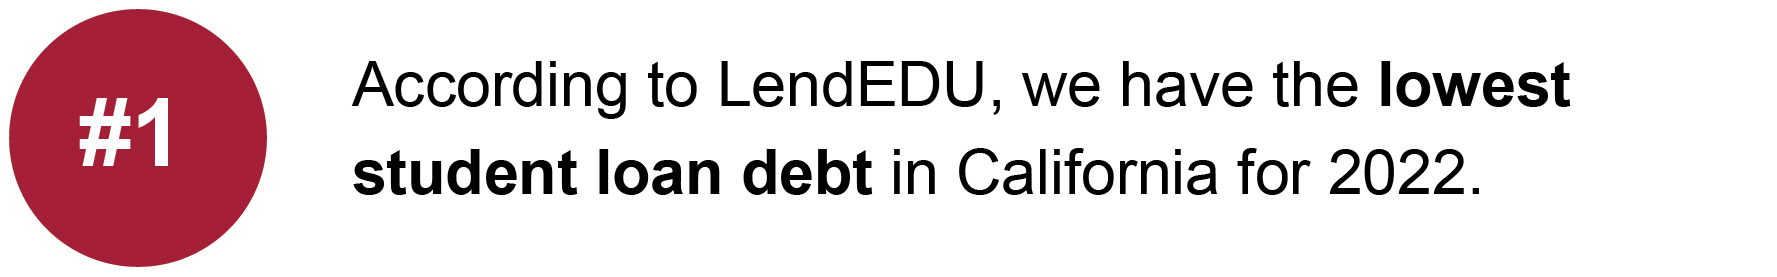 According to LendEDU, we have the lowest student loan debt in Califronia for 2022– www.lendedu.com